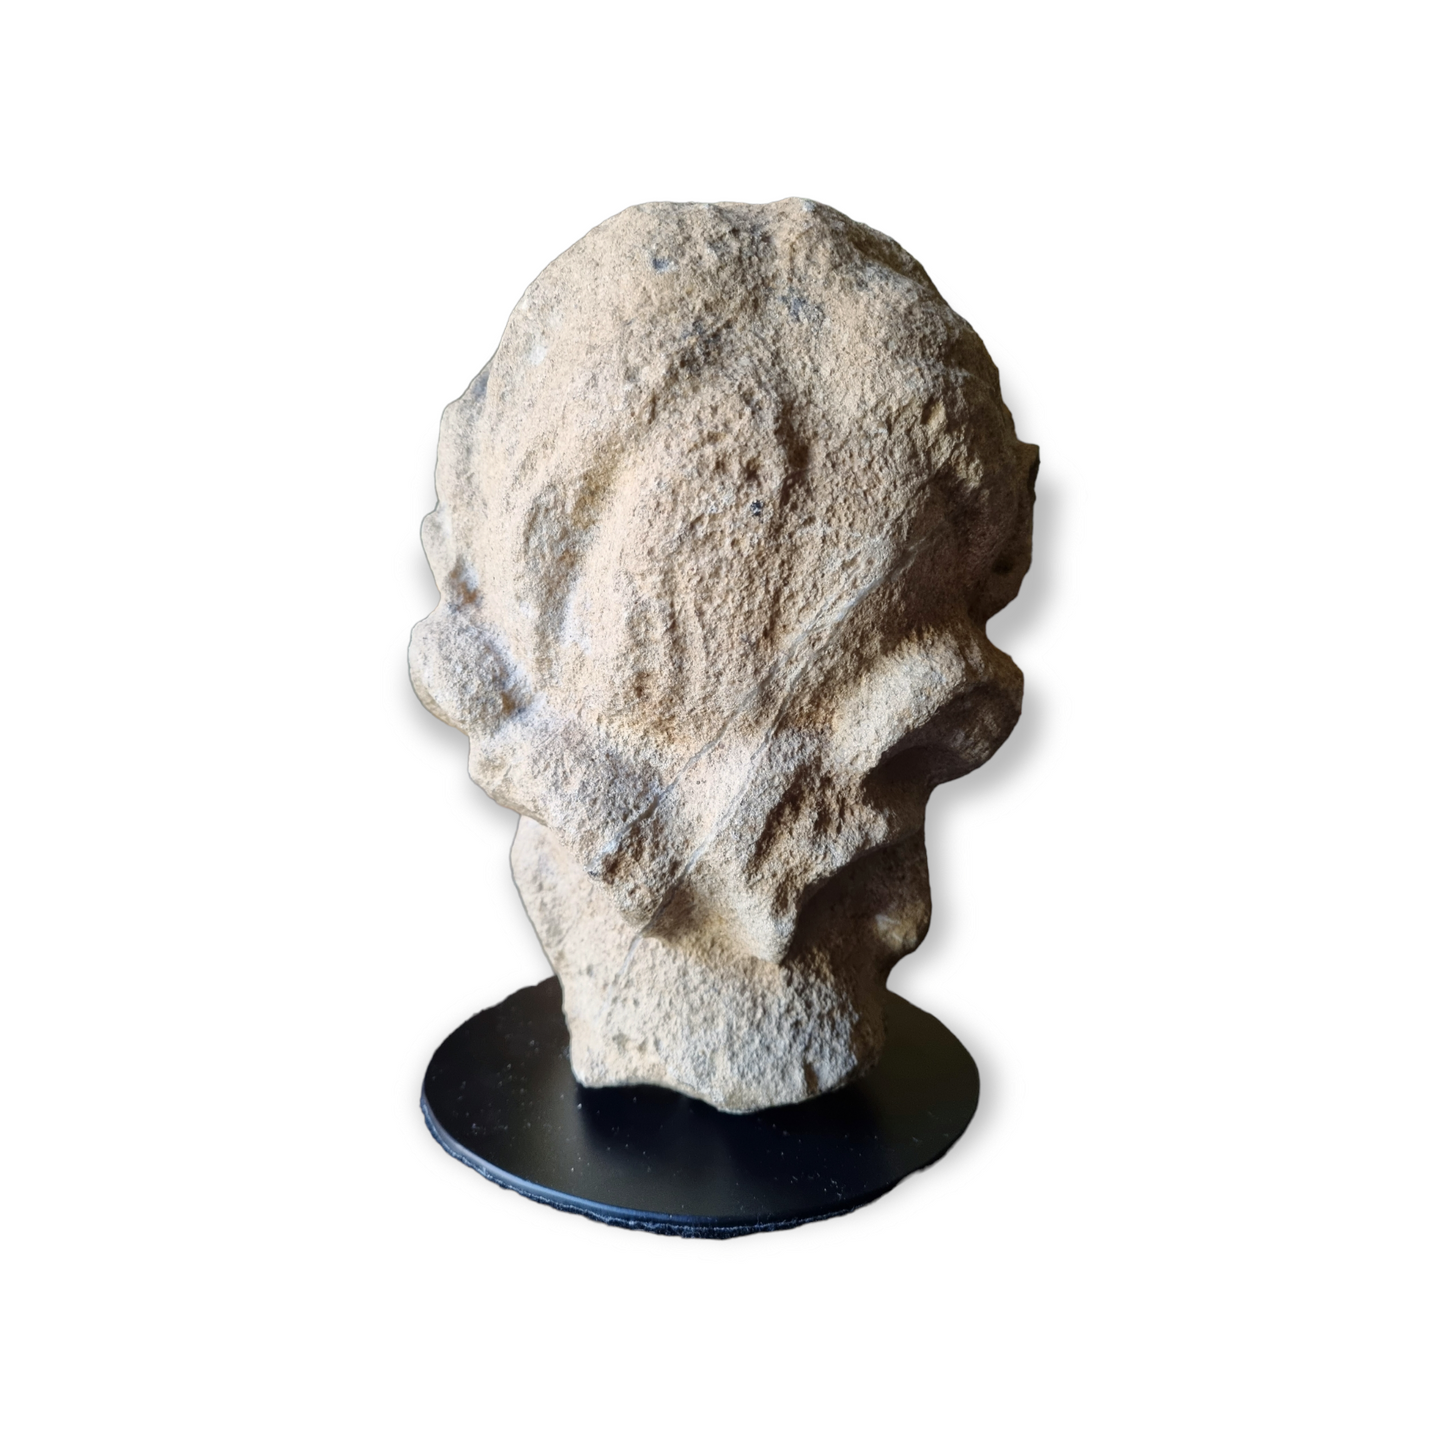 Grand Tour Roman Antiquity - 2nd Century AD - A Life-Size Antique Carved Stone Head of a Female Goddess, Possibly Venus